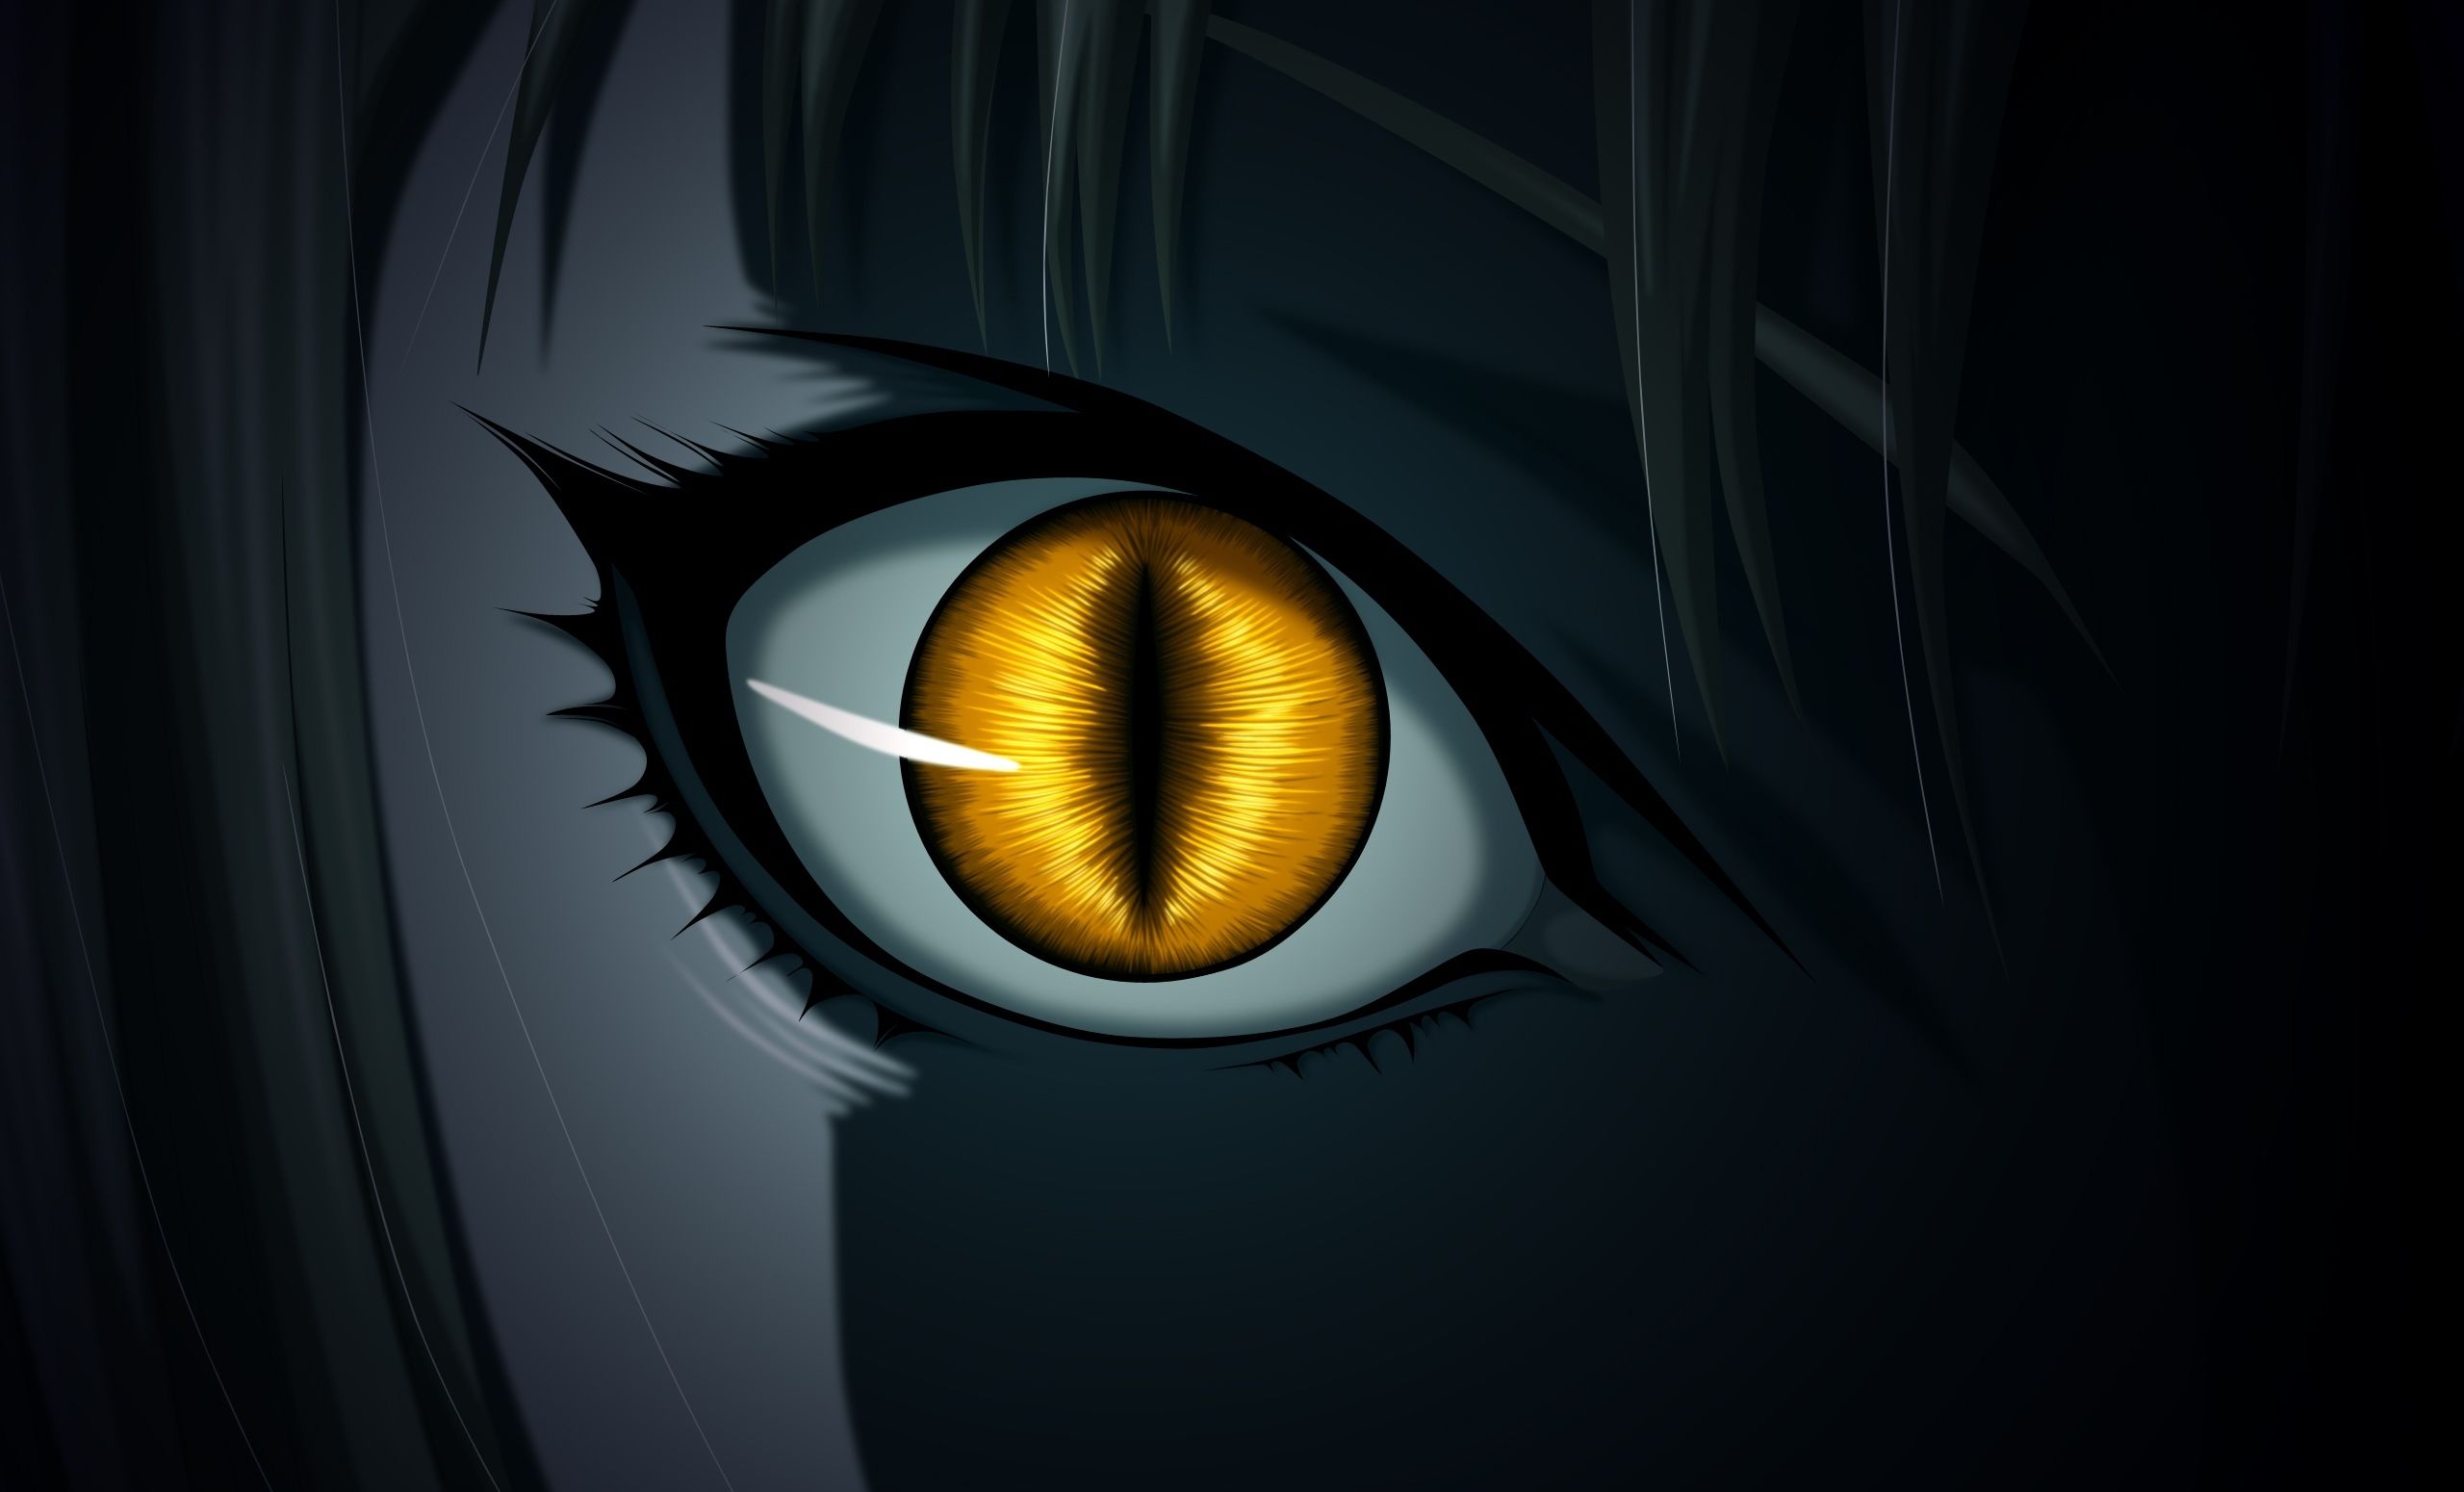 Demon Anime Eyes Wallpapers - Wallpaper Cave